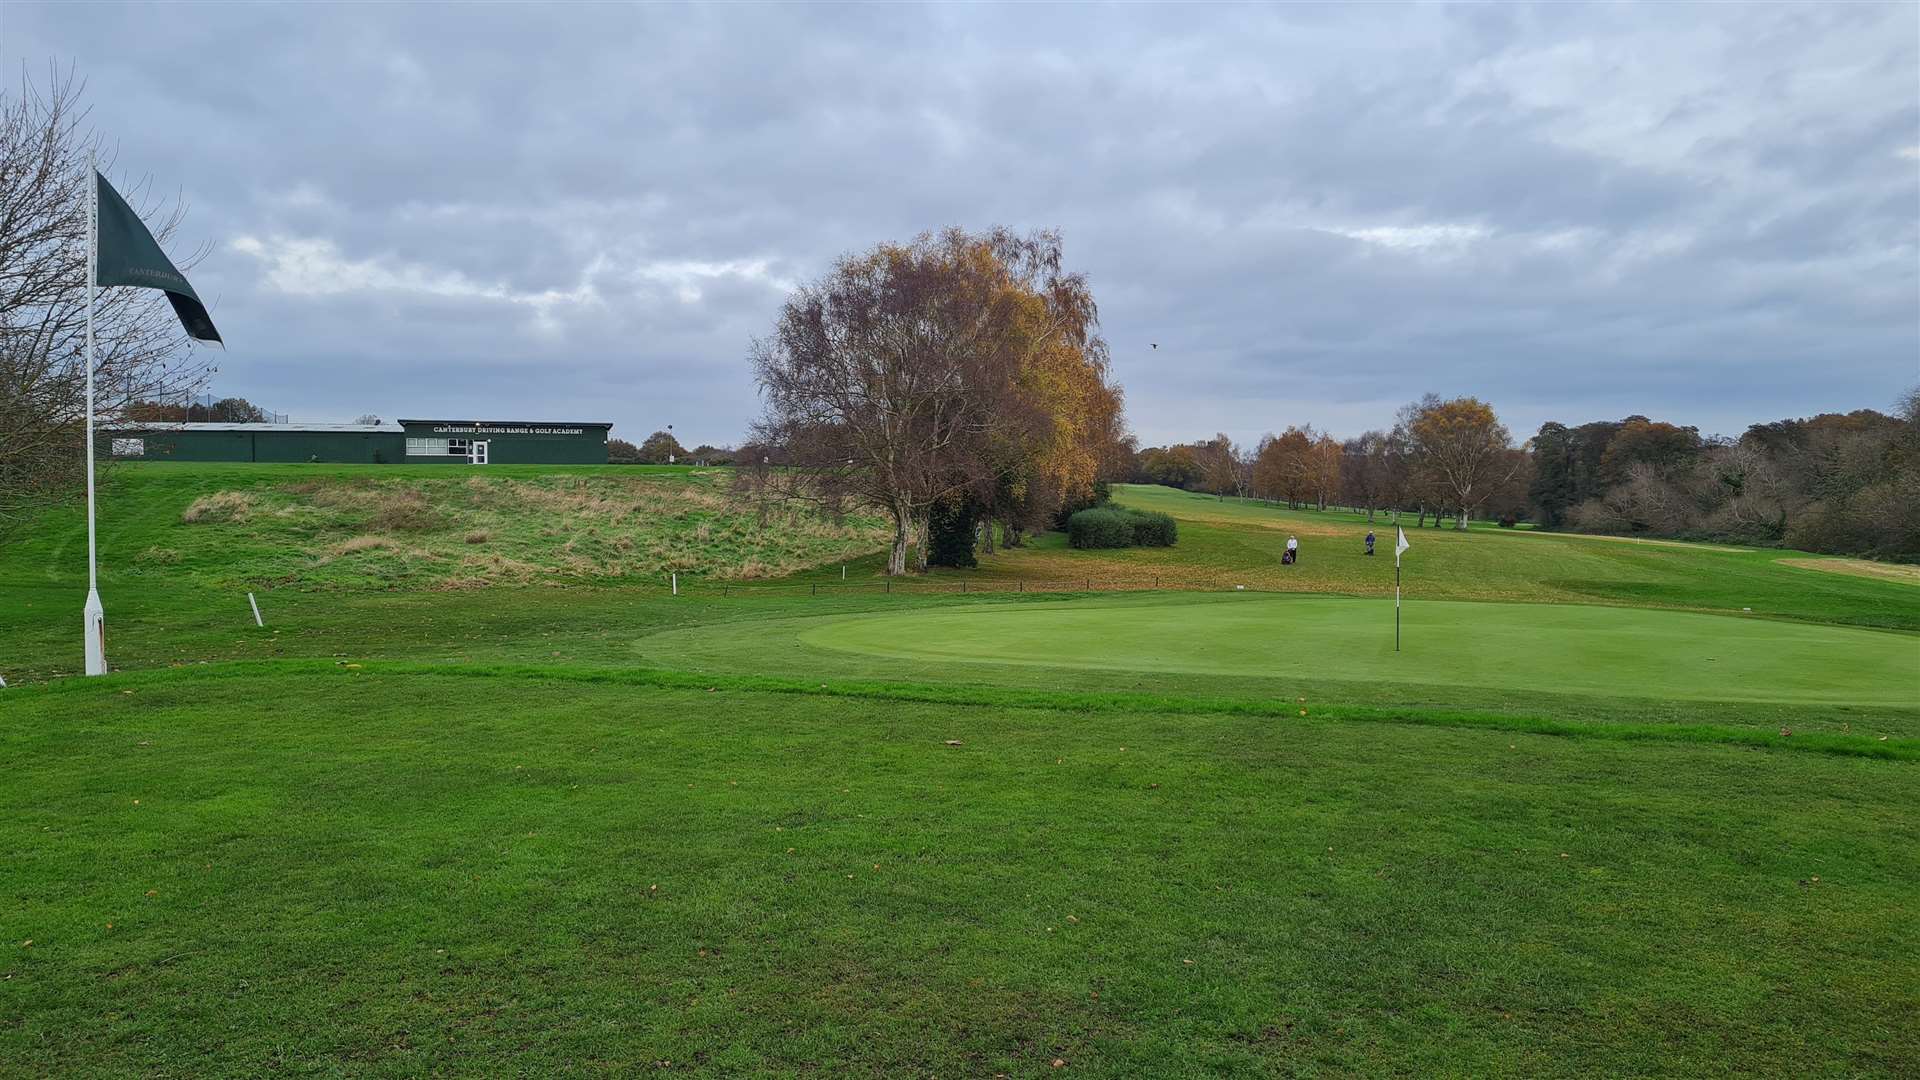 Areas of Canterbury Golf Club are poised to be developed on